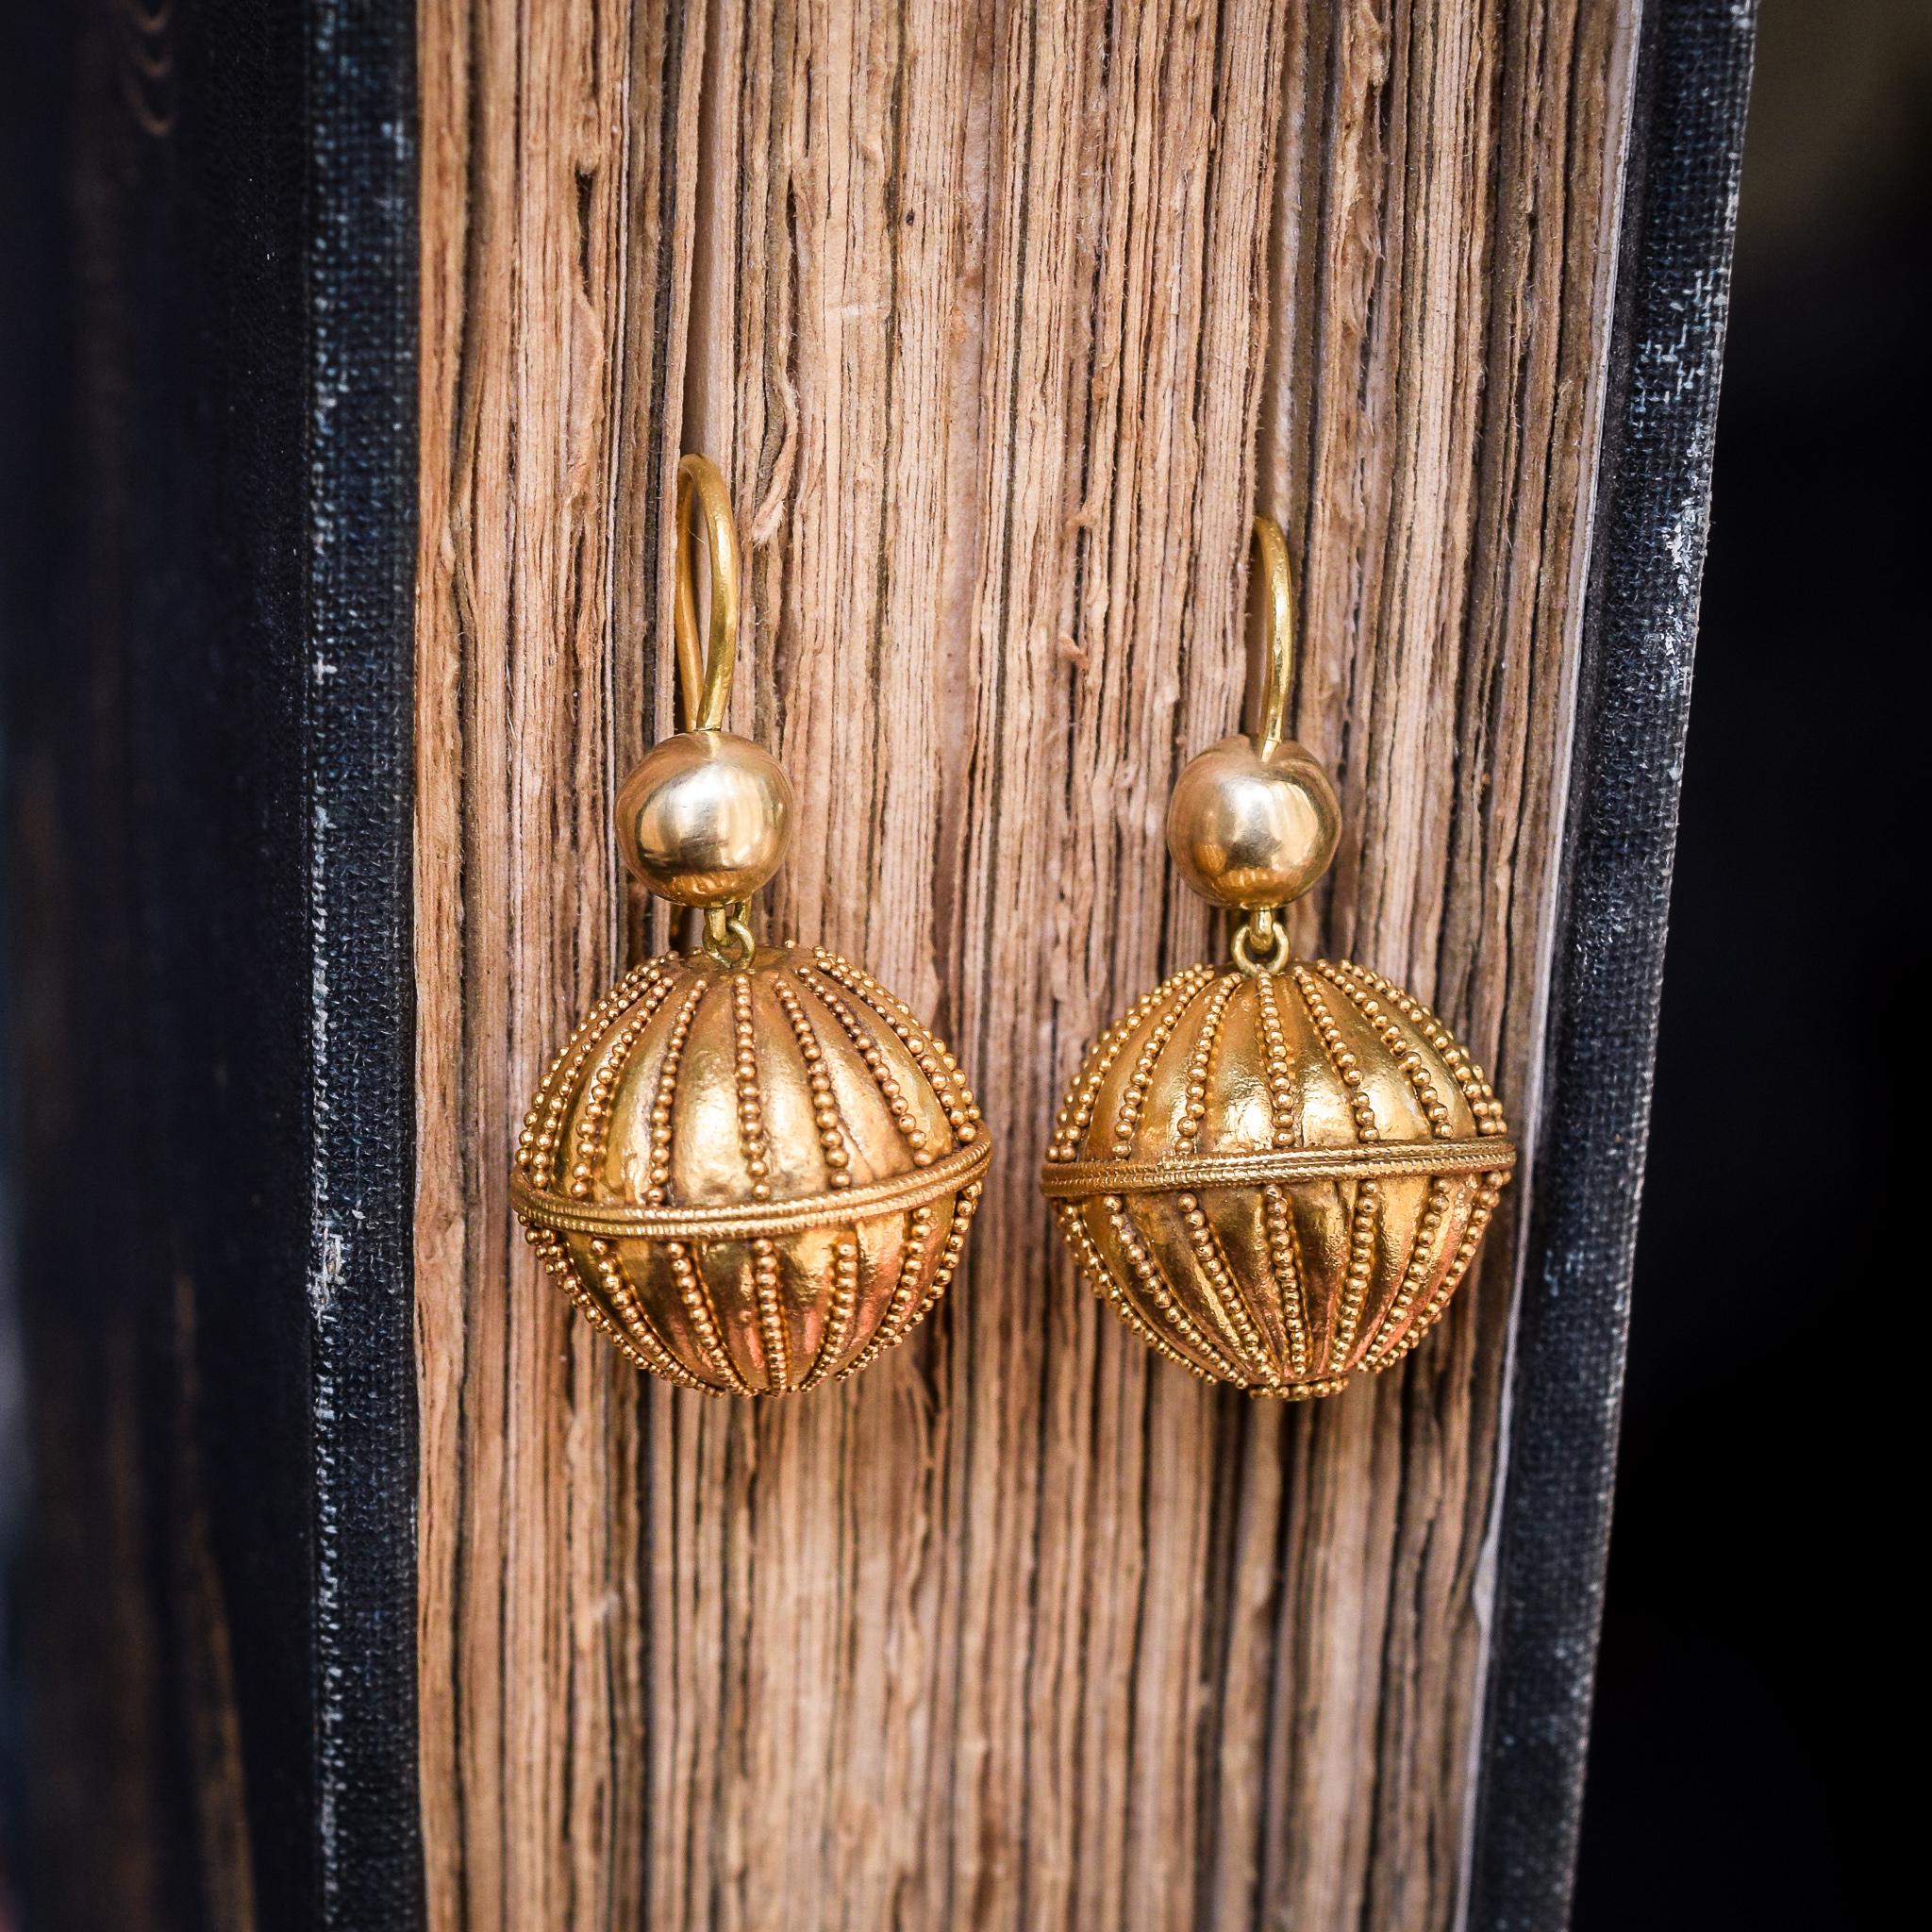 Antique Victorian Etruscan Revival Gold Orb Earrings 1